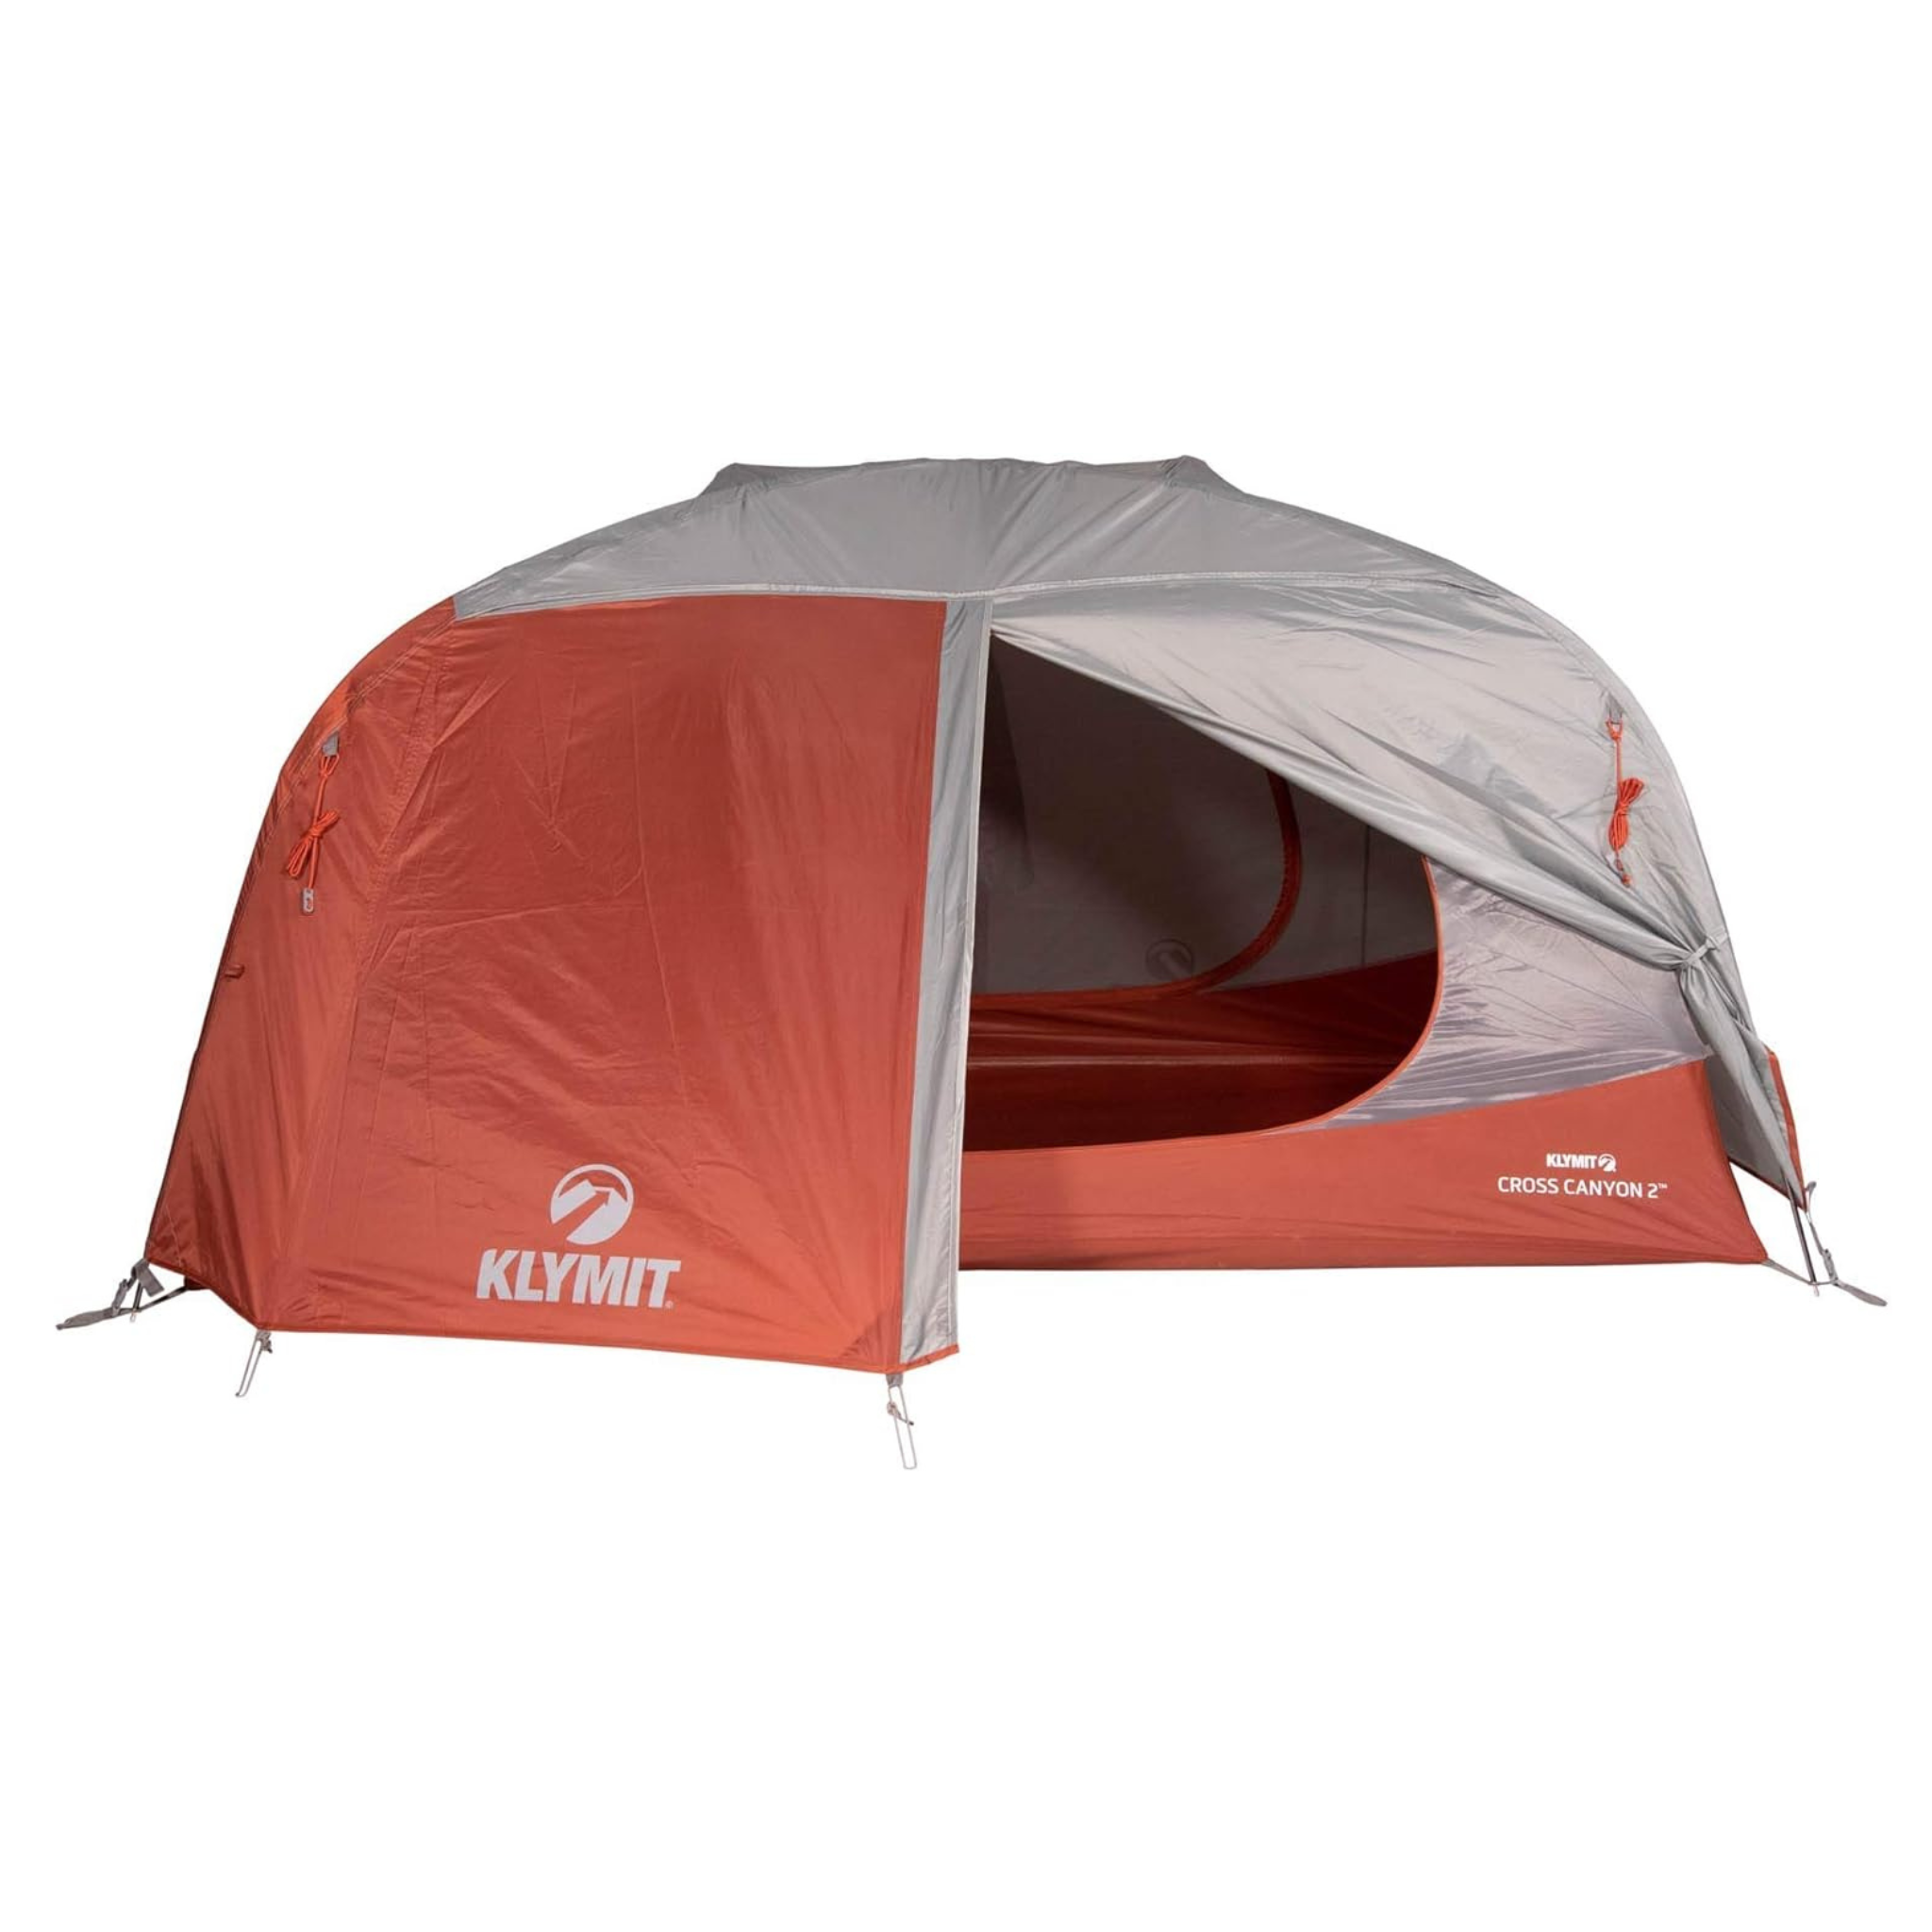 Klymit Cross Canyon 2 Person Tent